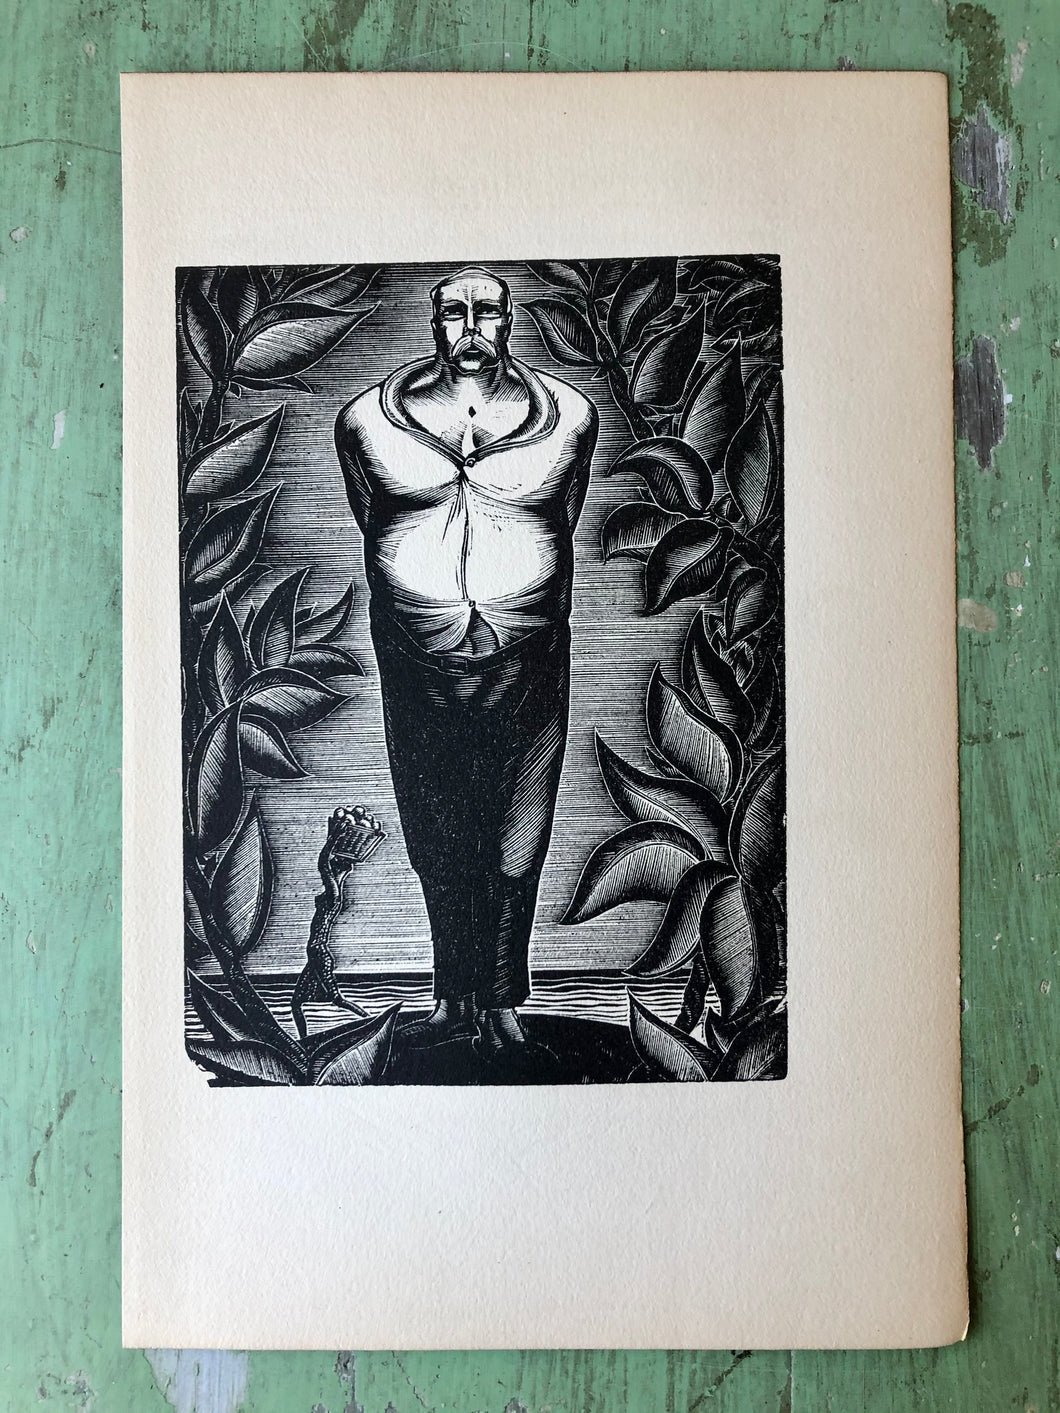 Woodcut Print by Lynd Ward from “Hot Countries” by Alec Waugh